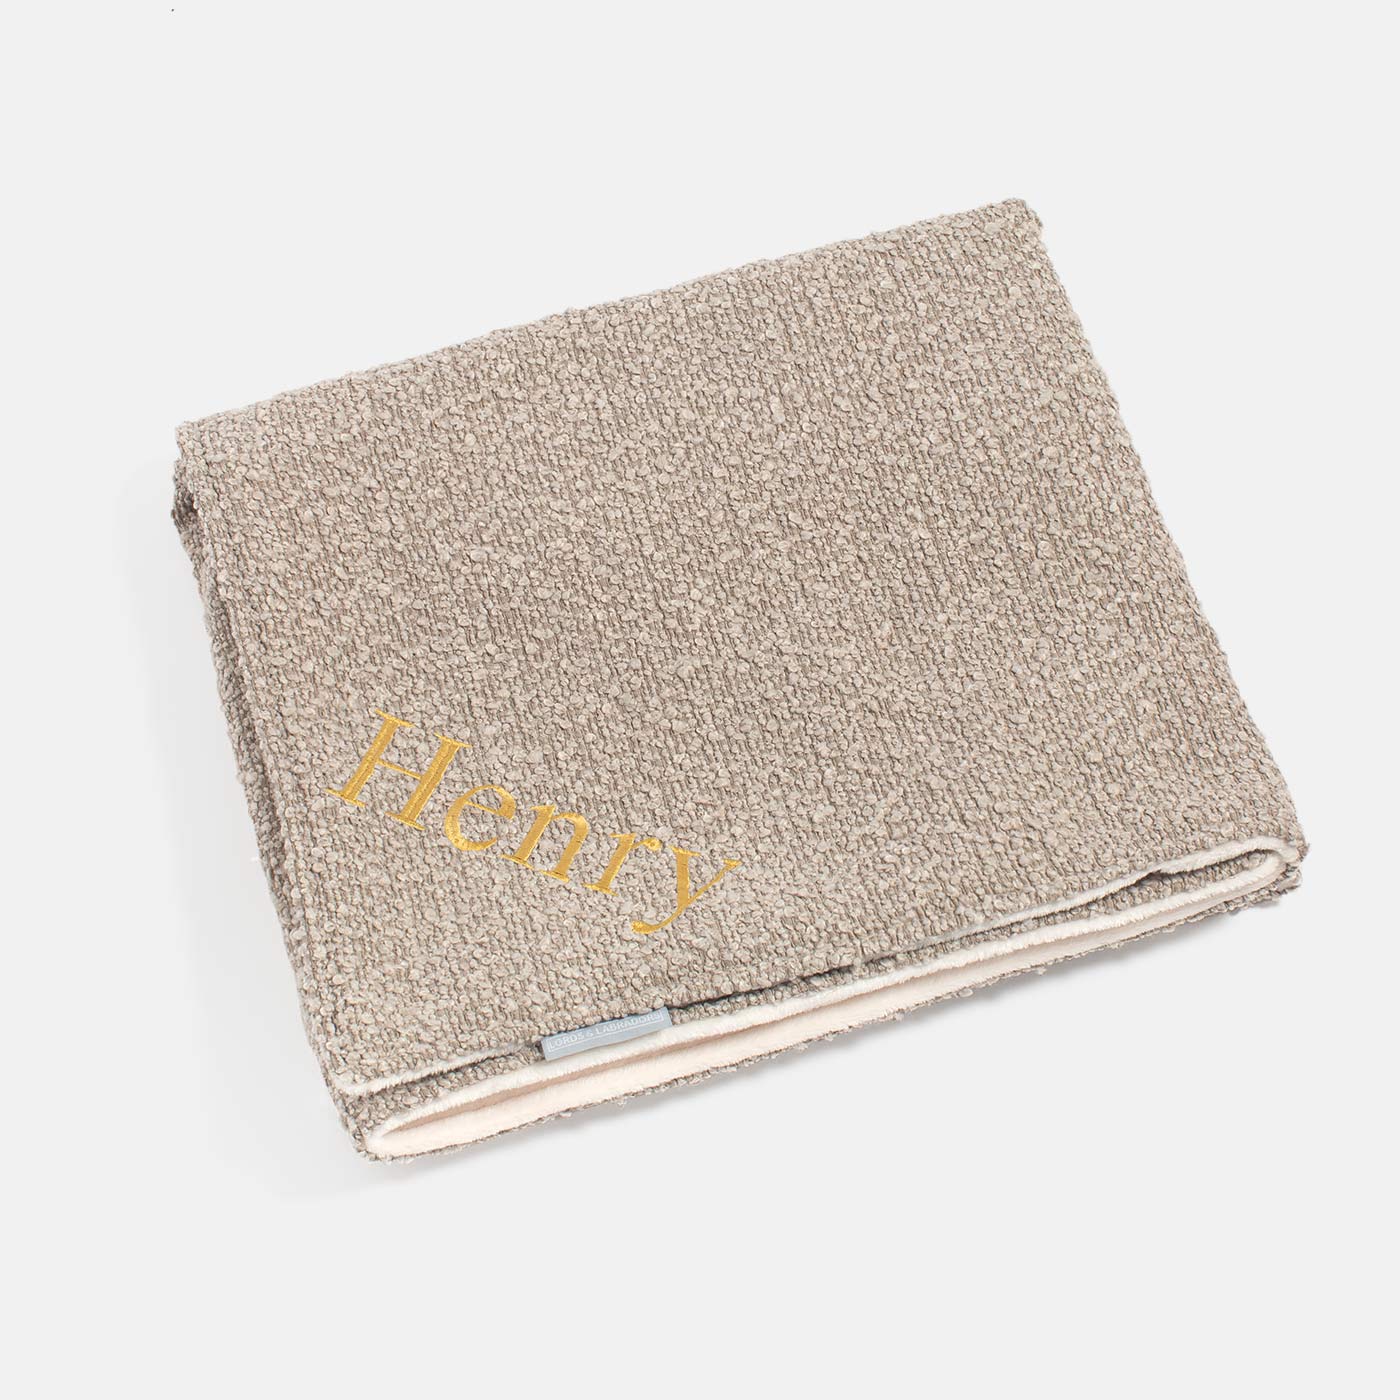 [color:Mink Boucle] Super Soft Sherpa & Teddy Fleece Lining, Our Luxury Cat & Kitten Blanket In Stunning Mink Boucle I The Perfect Cat Bed Accessory! Available To Personalize at Lords & Labradors US